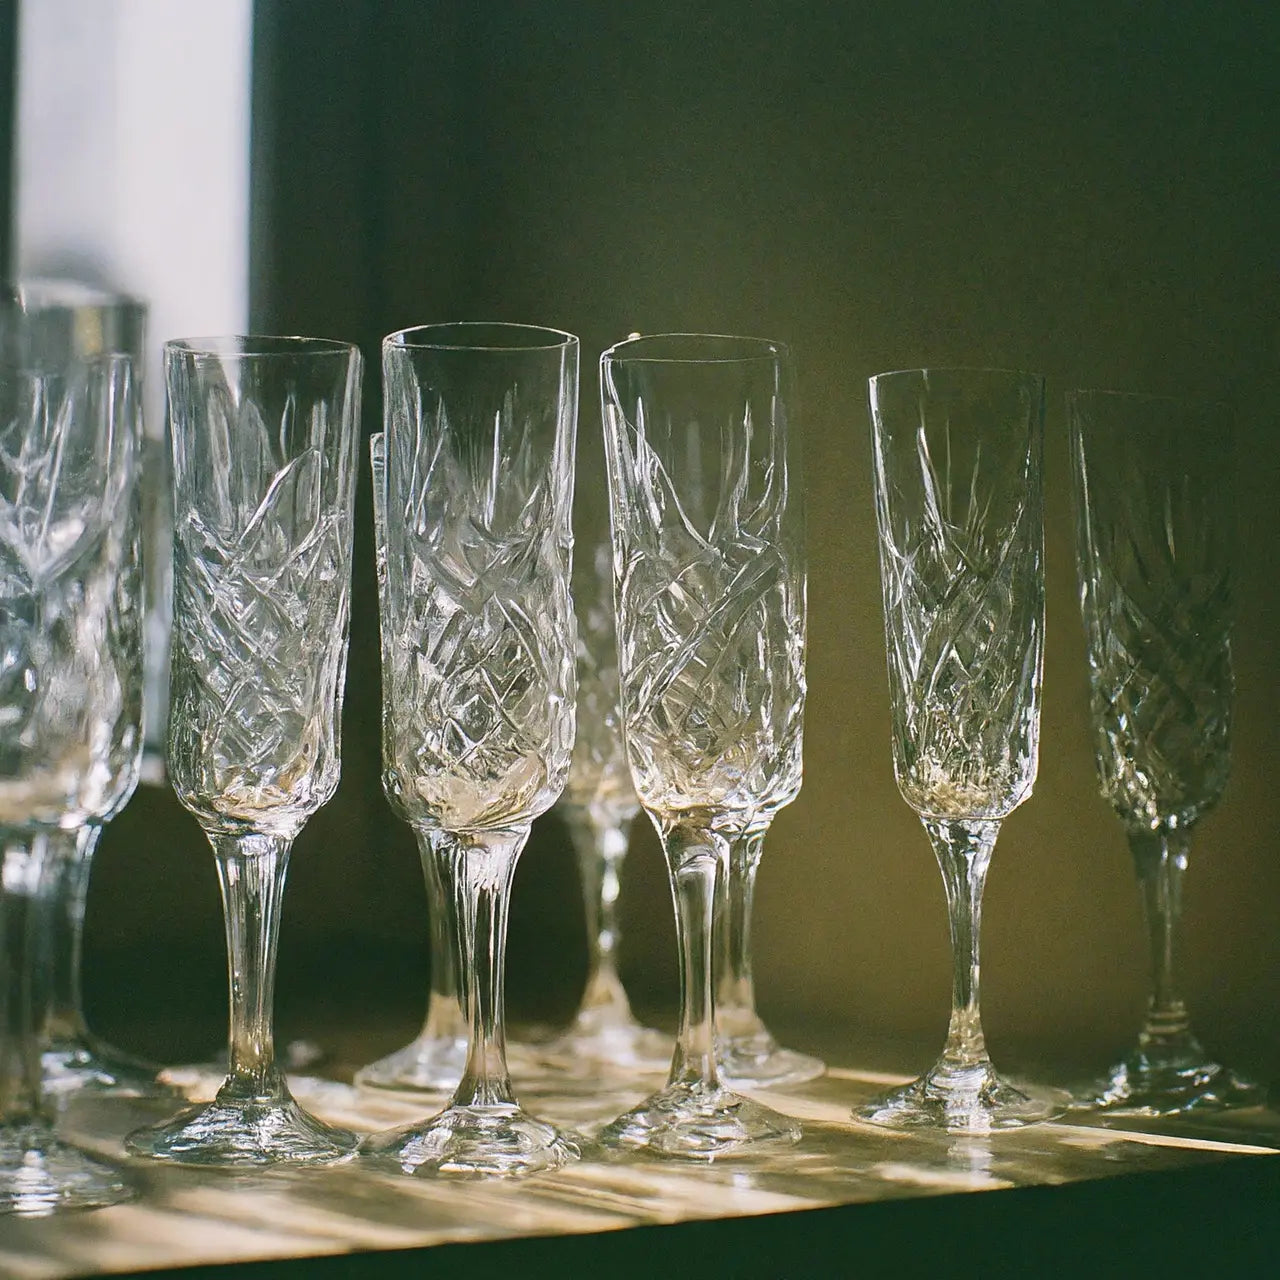 Elevating Your Home Bar Experience with Elegant Highball Glasses